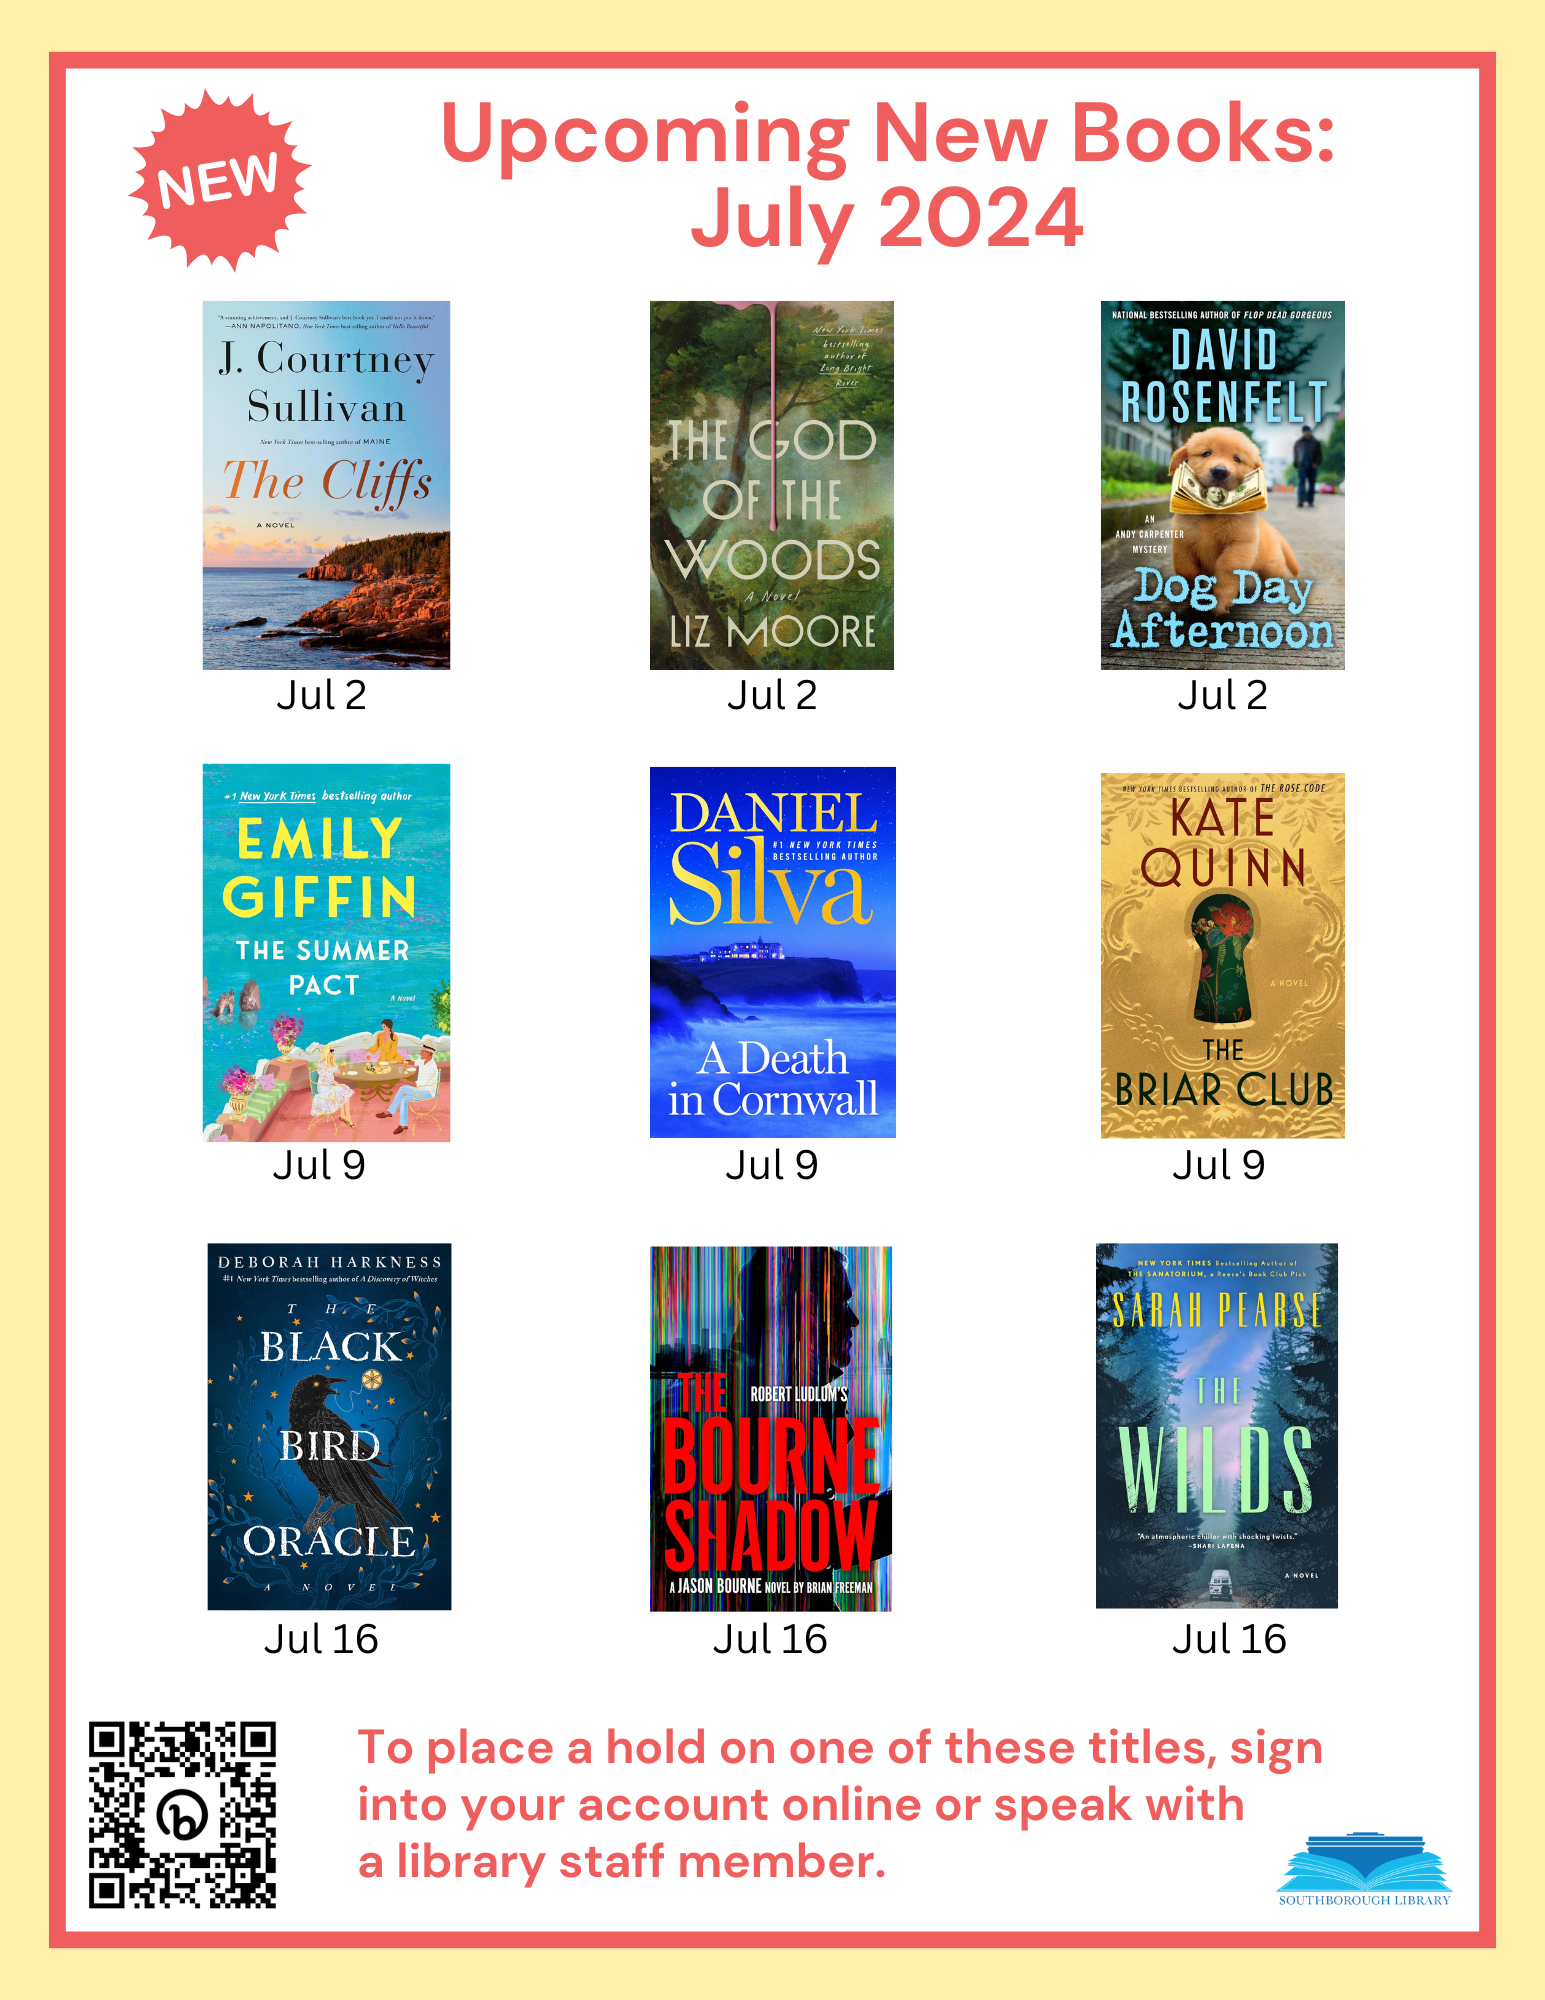 July 2024 upcoming new books